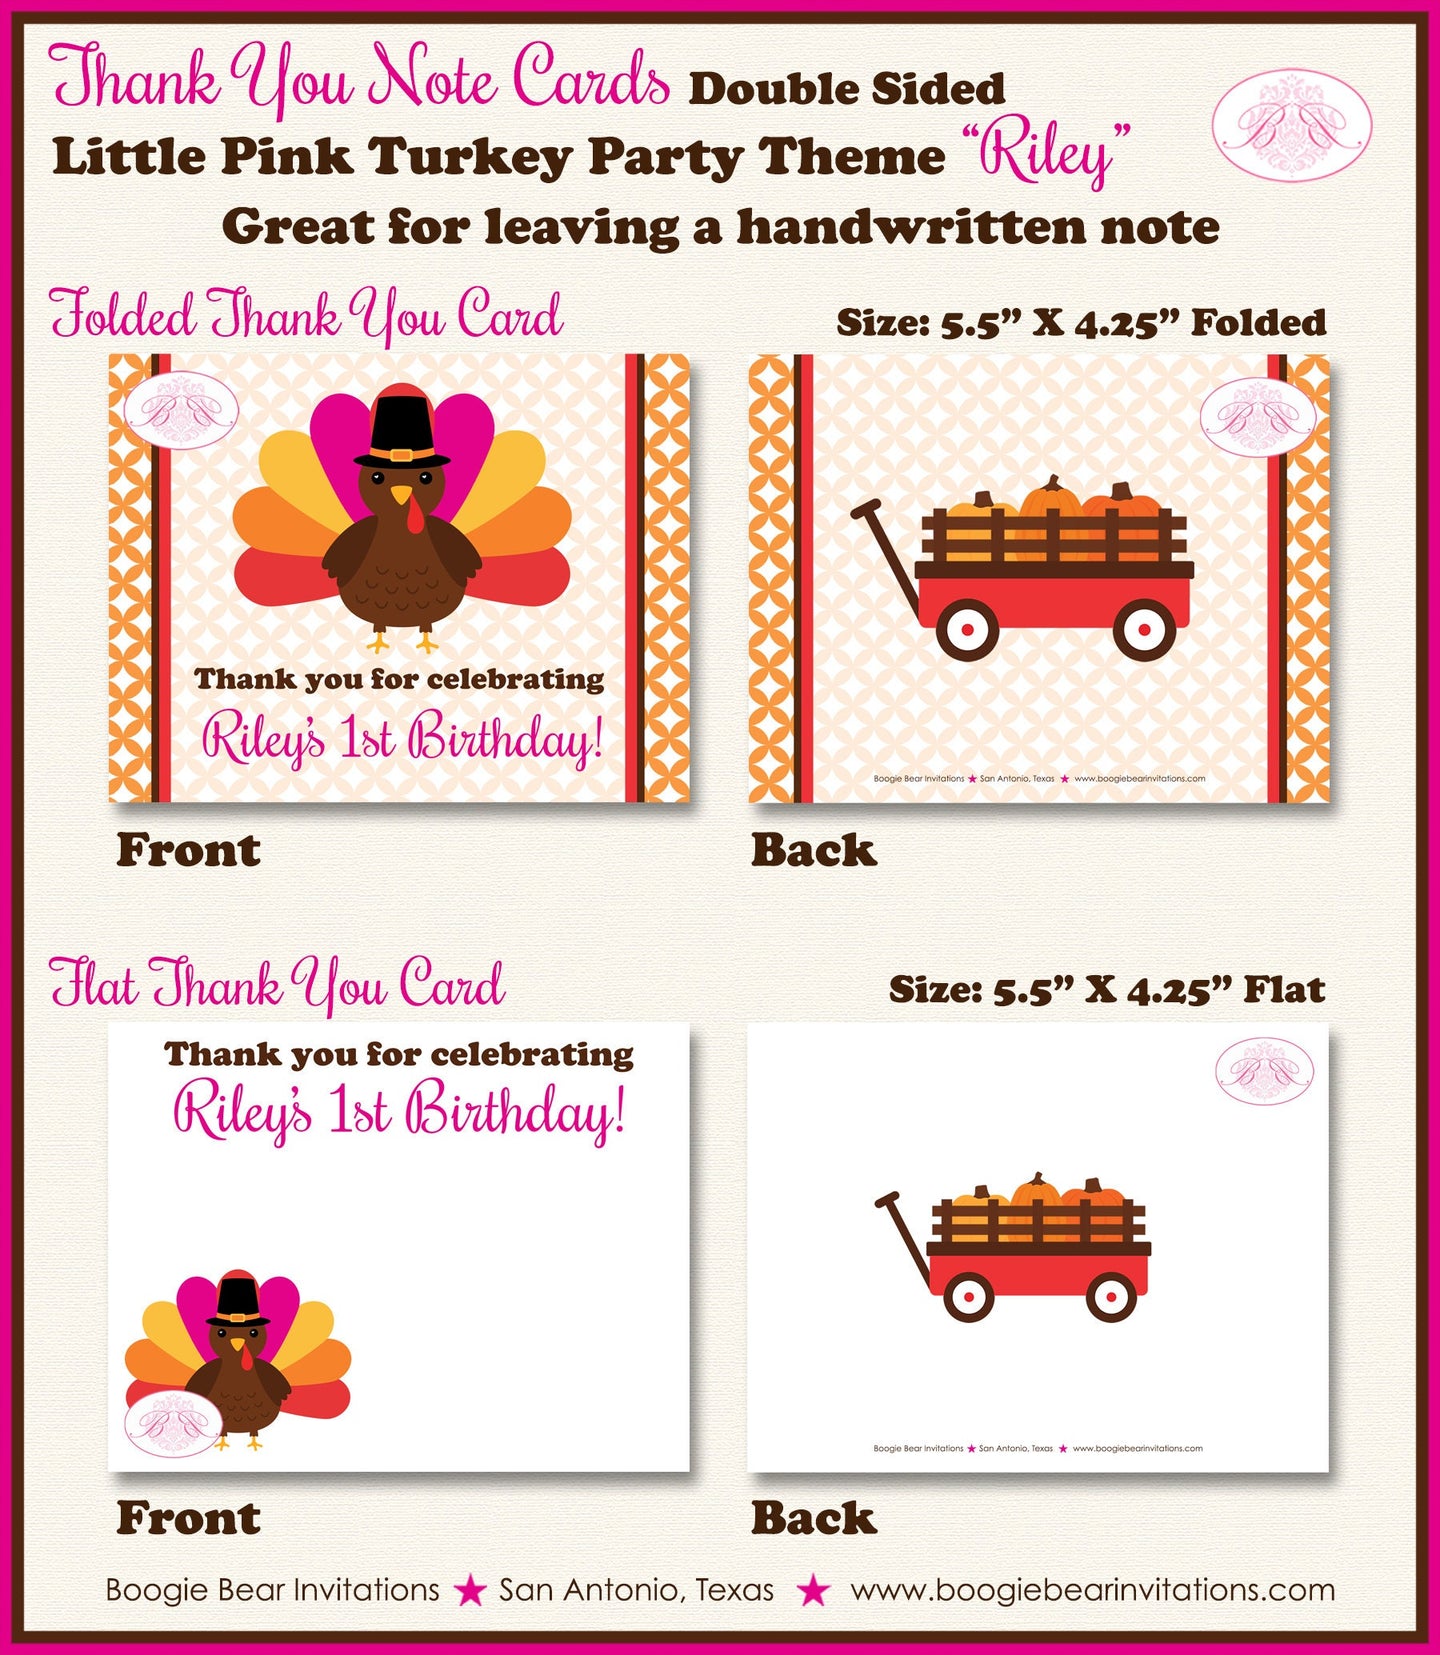 Little Pink Turkey Party Thank You Card Birthday Girl Fall Thanksgiving Pumpkin Autumn Gobble Boogie Bear Invitations Riley Theme Printed